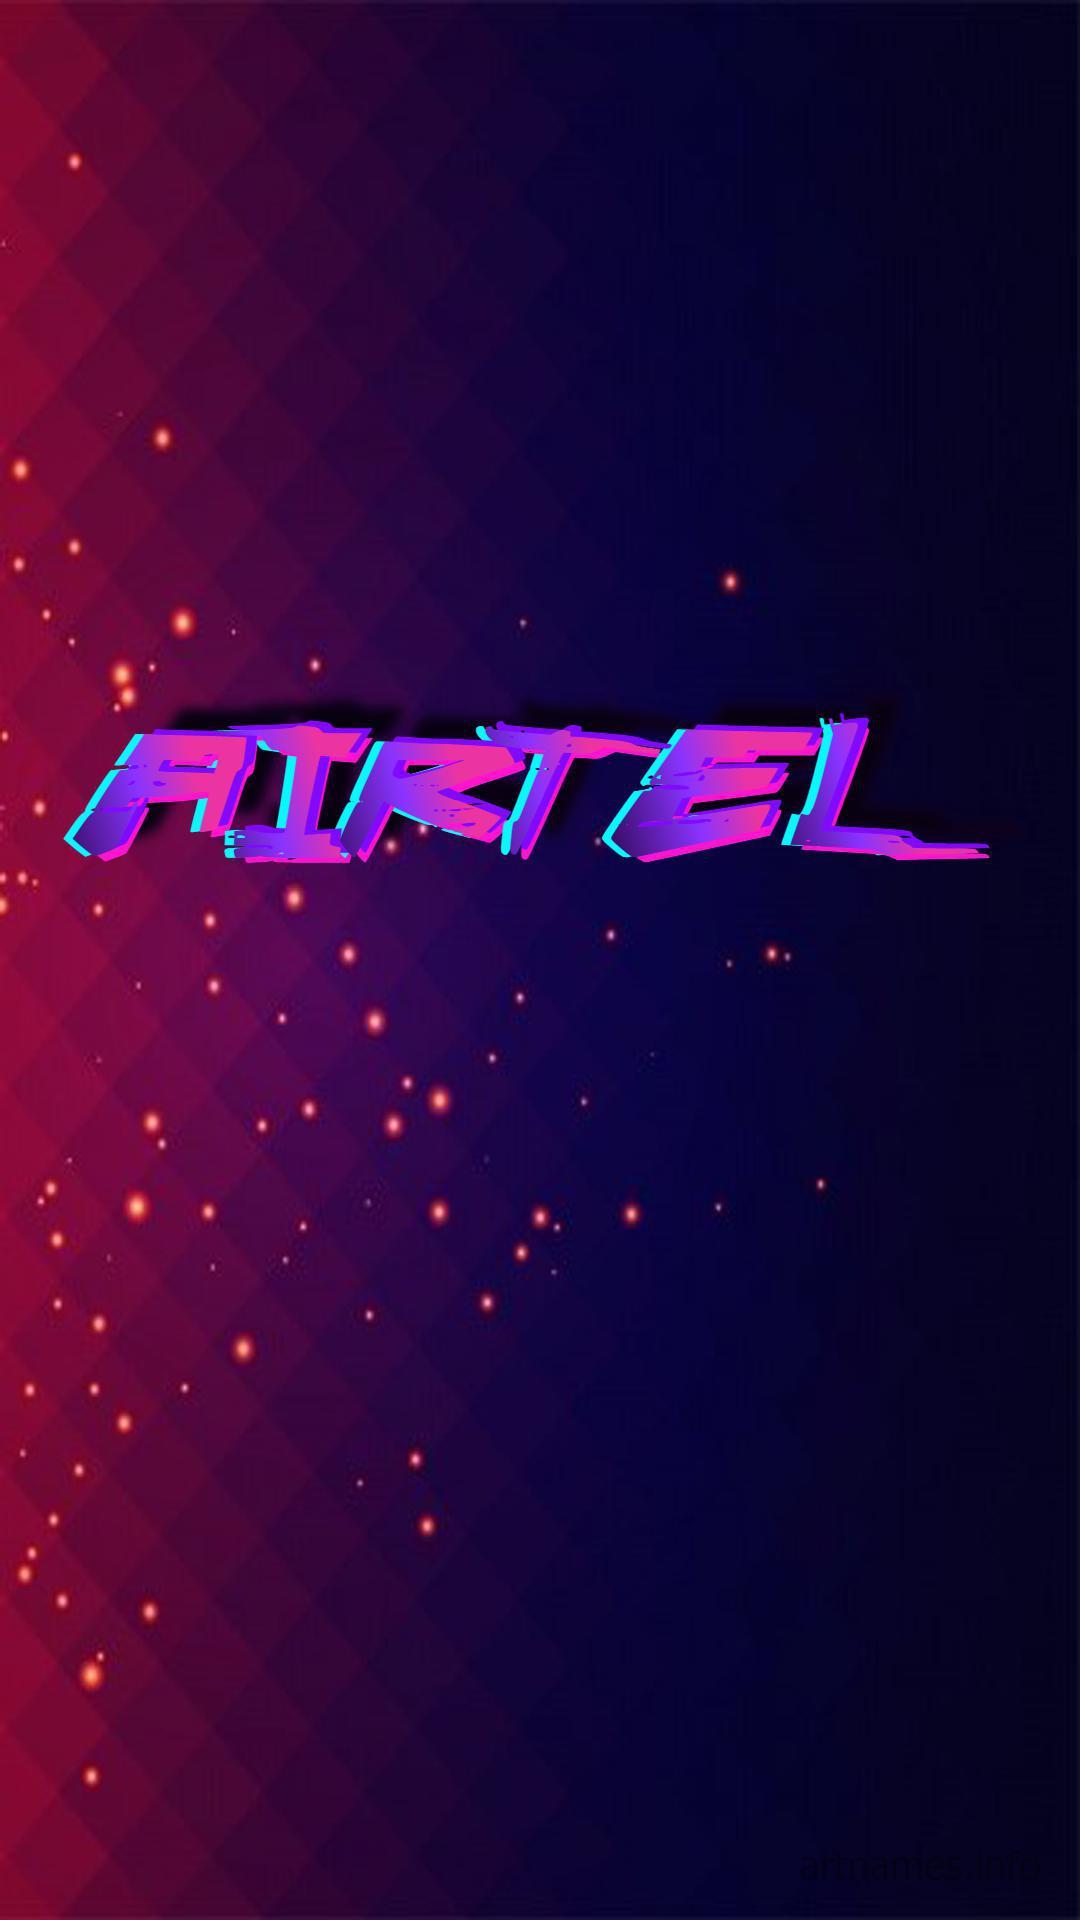 Bharti Airtel 5G Service Goes Live in 8 Cities, Customers to Pay as per  Existing 4G Plan | Technology News